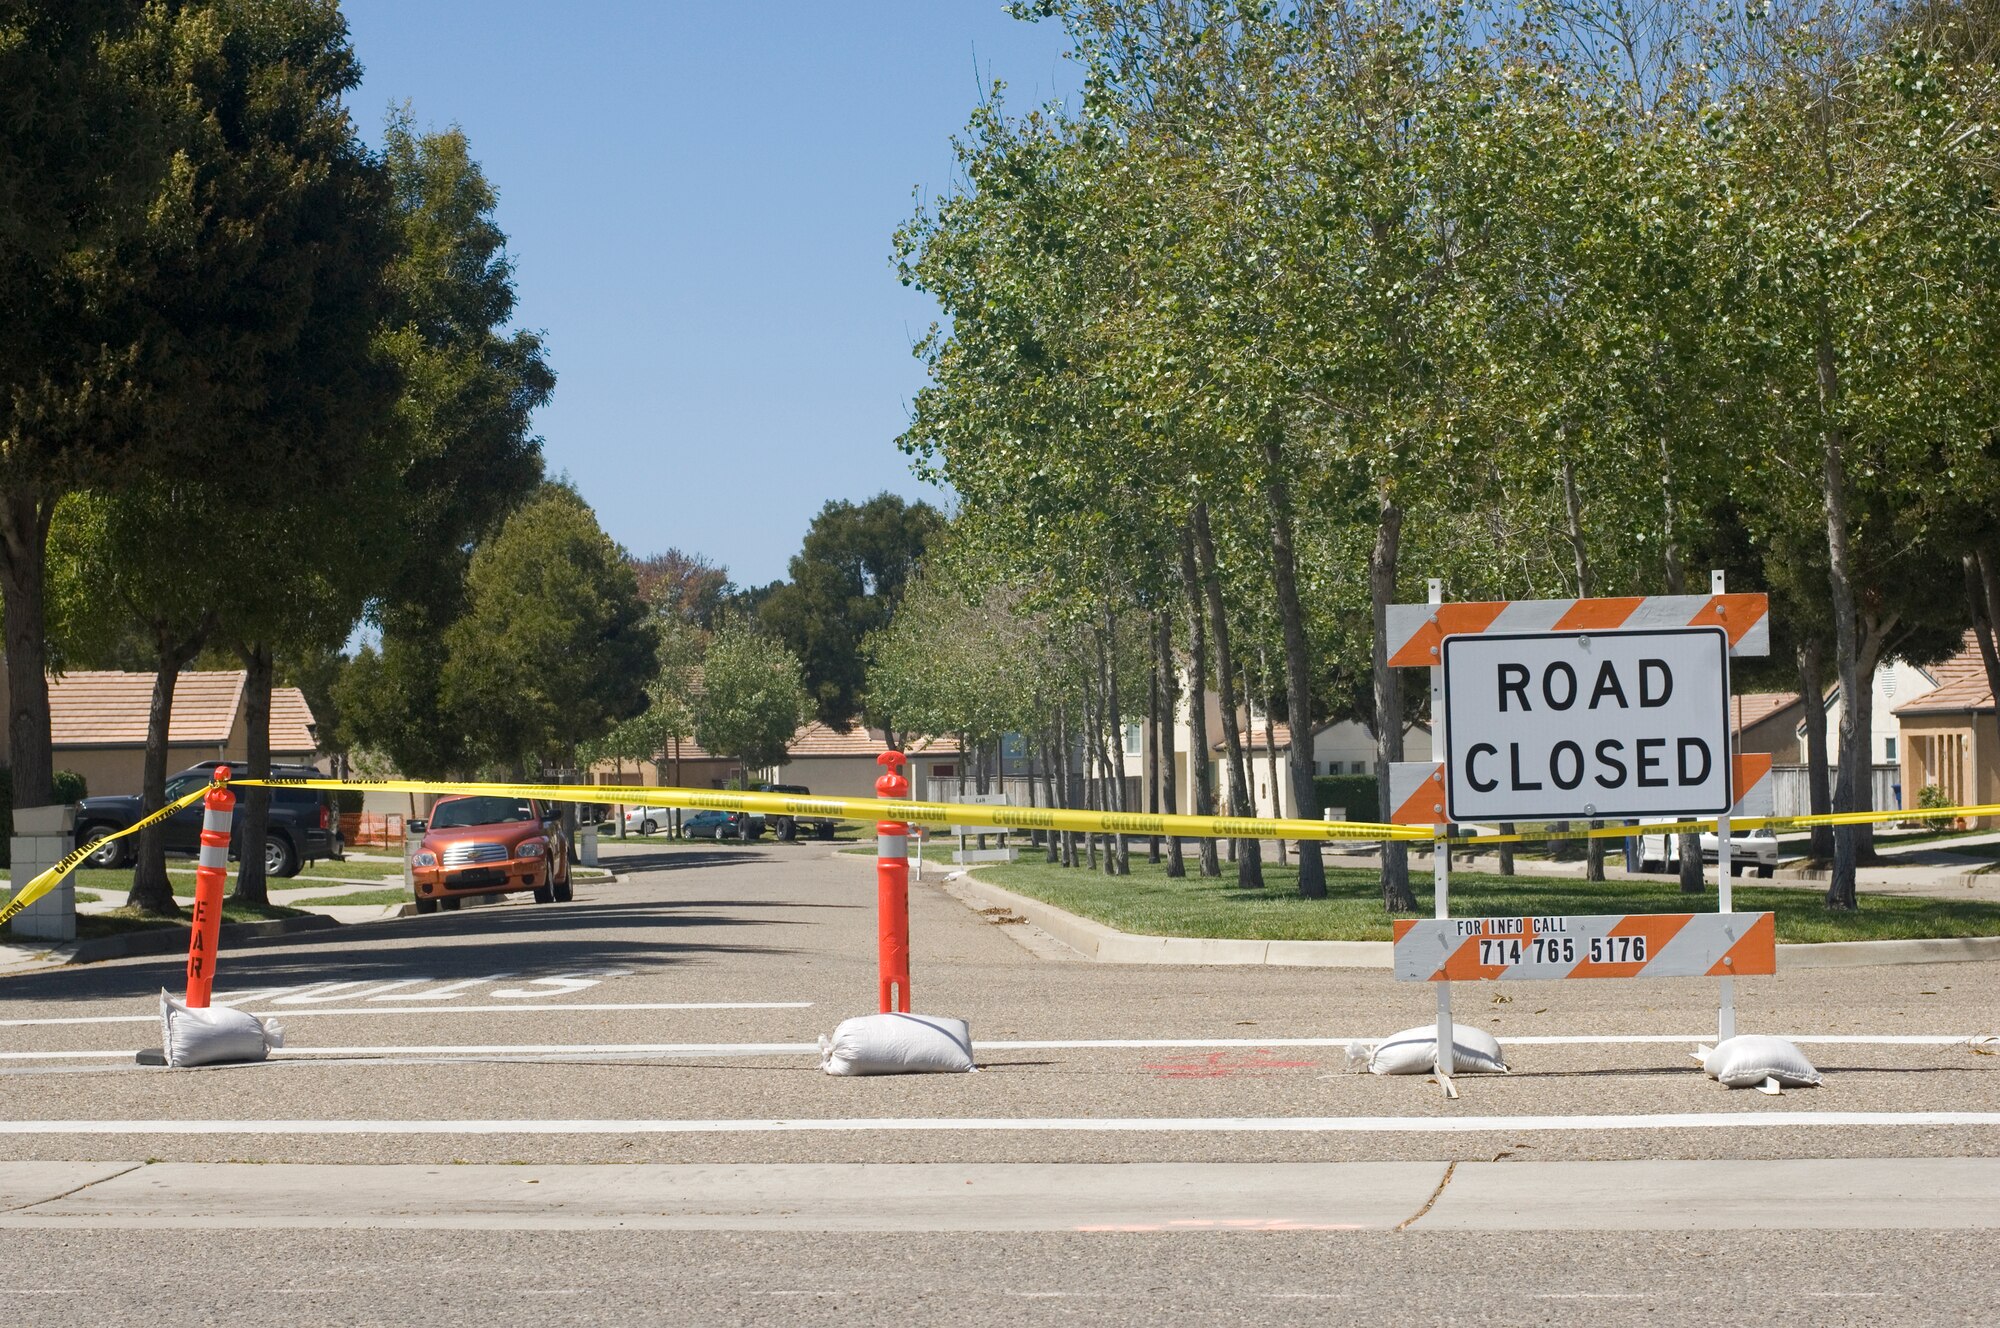 VANDENEBERG AIR FORCE BASE, Calif. – A section of Ocean Avenue is closed off during construction on Utah Avenue here Thursday, April 8, 2010. The construction will replace aging water pipes to improve quality of life in base housing. (U.S. Air Force photo/Staff Sgt. Levi Riendeau)